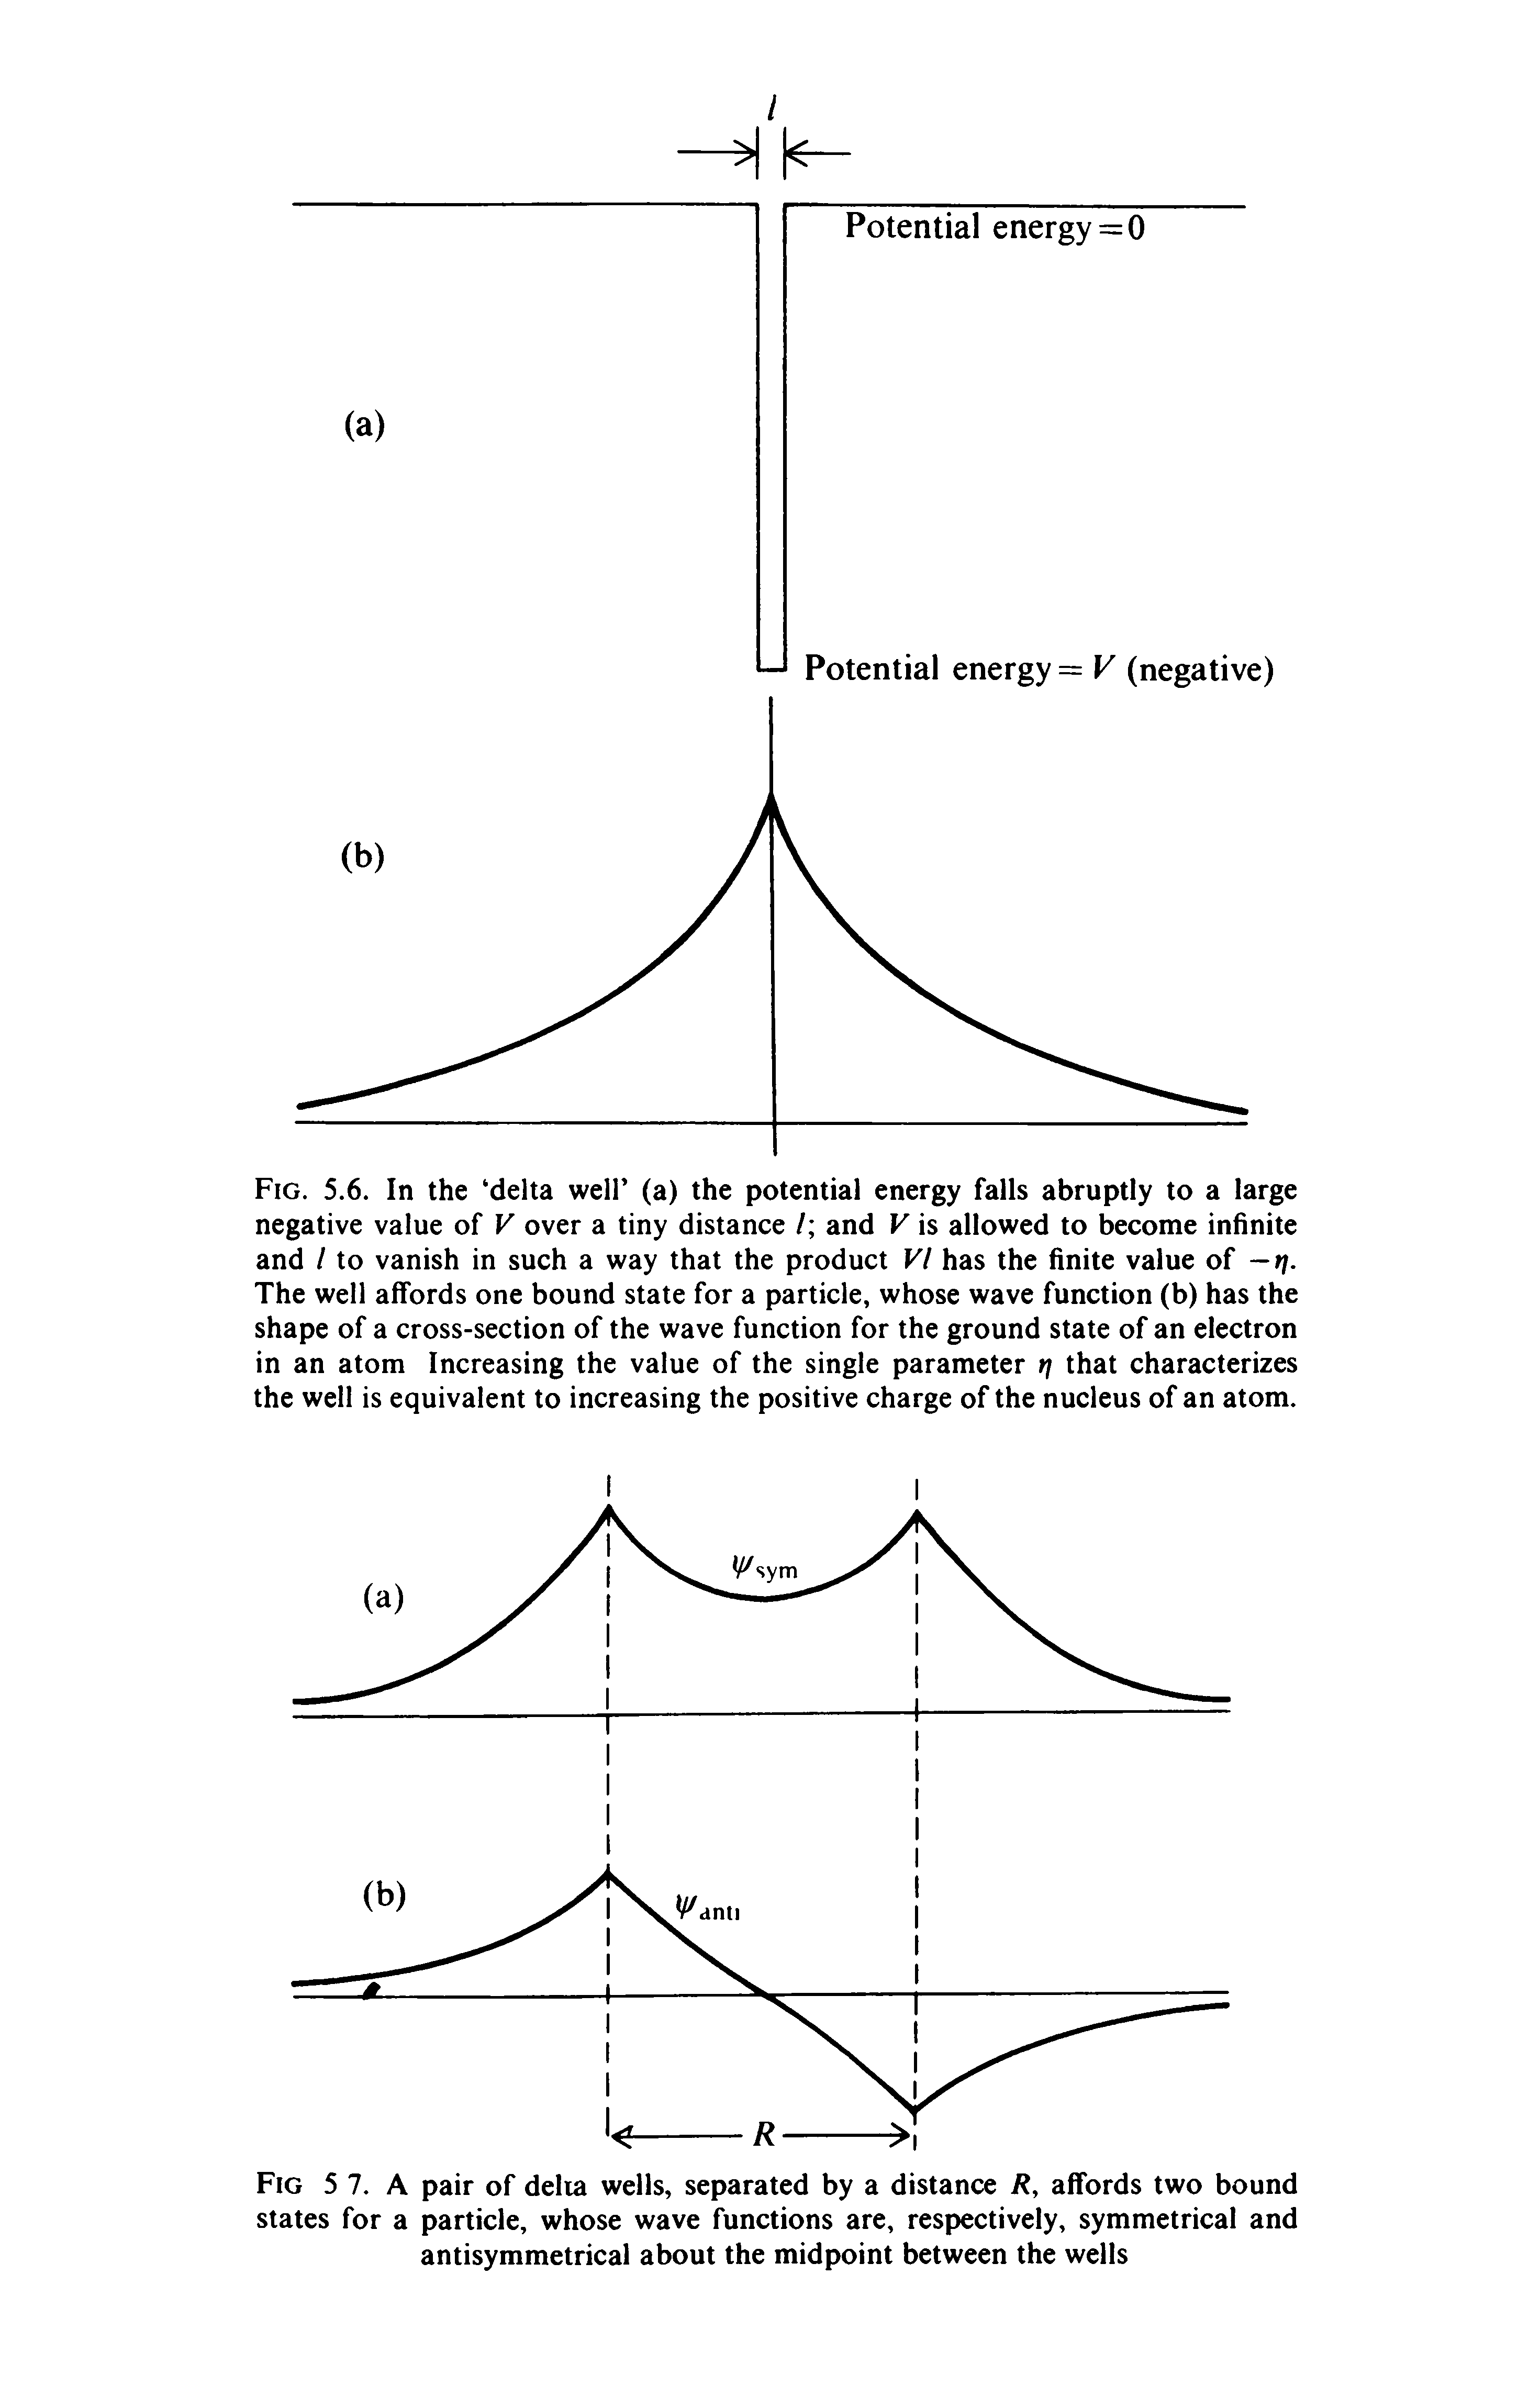 Fig. 5.6. In the delta well (a) the potential energy falls abruptly to a large negative value of V over a tiny distance / and V is allowed to become infinite and / to vanish in such a way that the product VI has the finite value of —r. The well affords one bound state for a particle, whose wave function (b) has the shape of a cross-section of the wave function for the ground state of an electron in an atom Increasing the value of the single parameter r that characterizes the well is equivalent to increasing the positive charge of the nucleus of an atom.